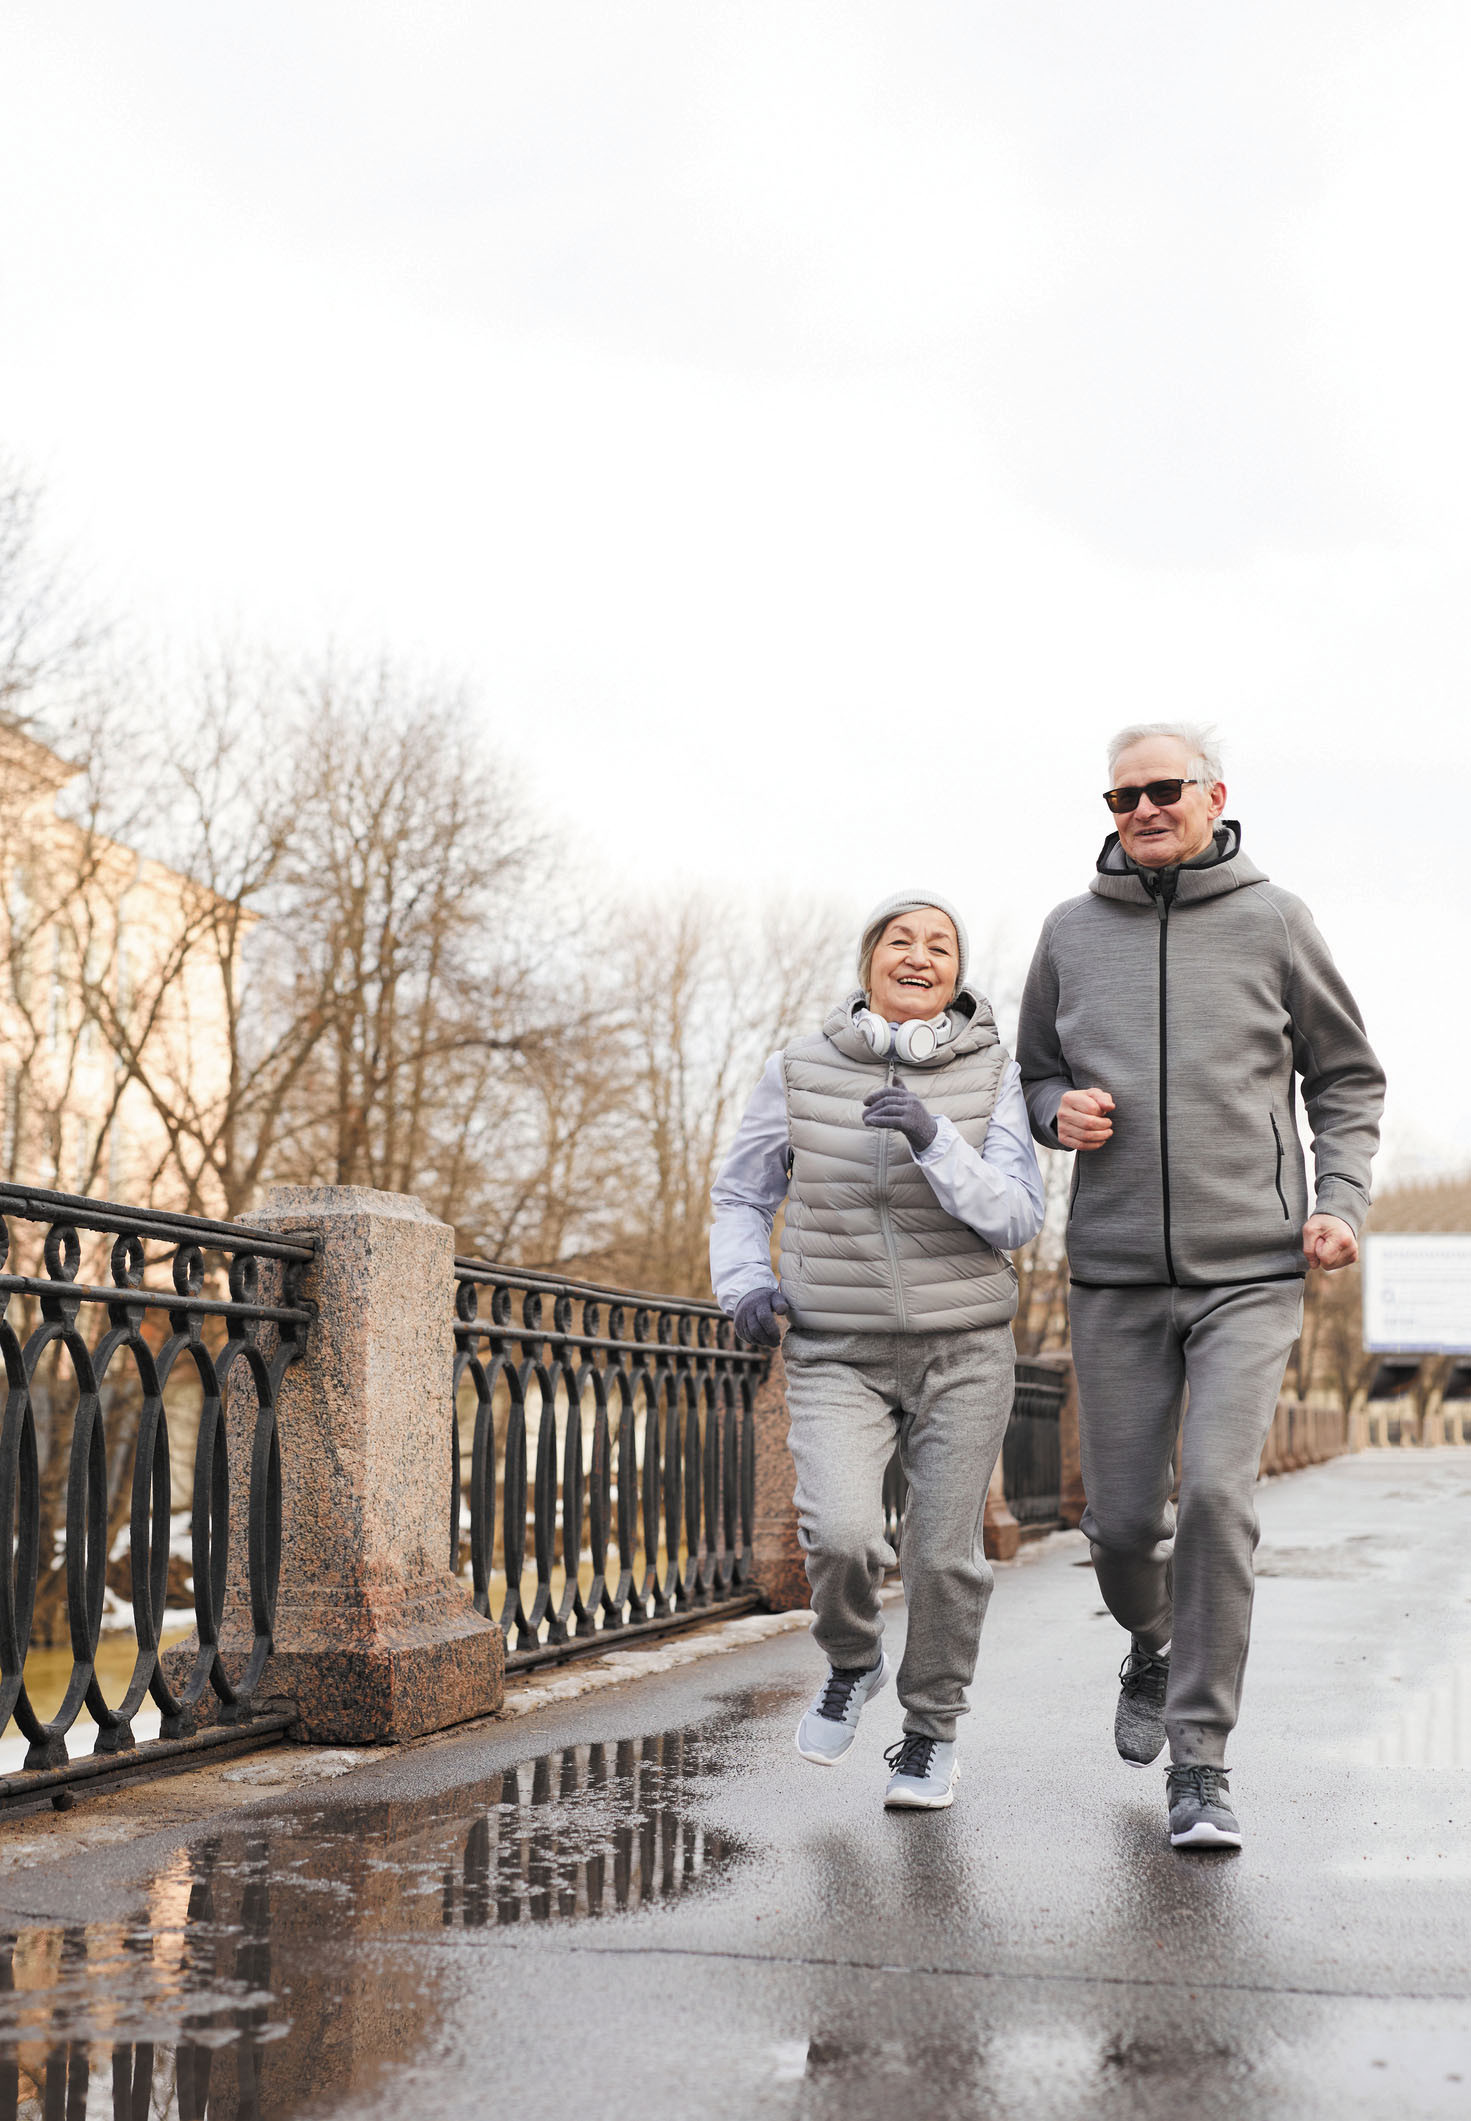 photo of a woman and man walking for fitness; they are dressed for cold weather